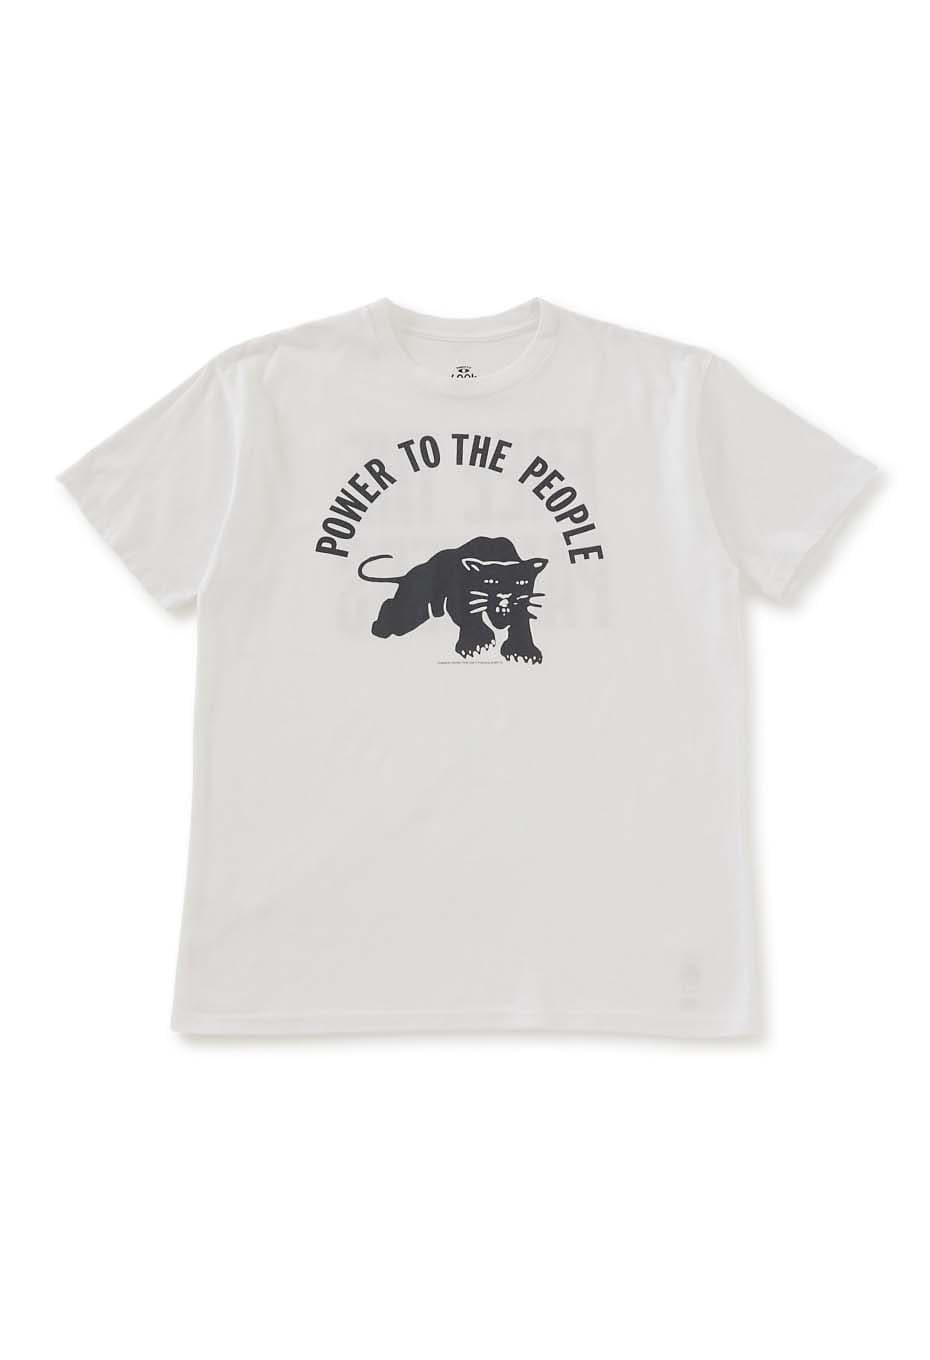 BLACK PANTHER PARTY /FREE THE PANTHER Tシャツ